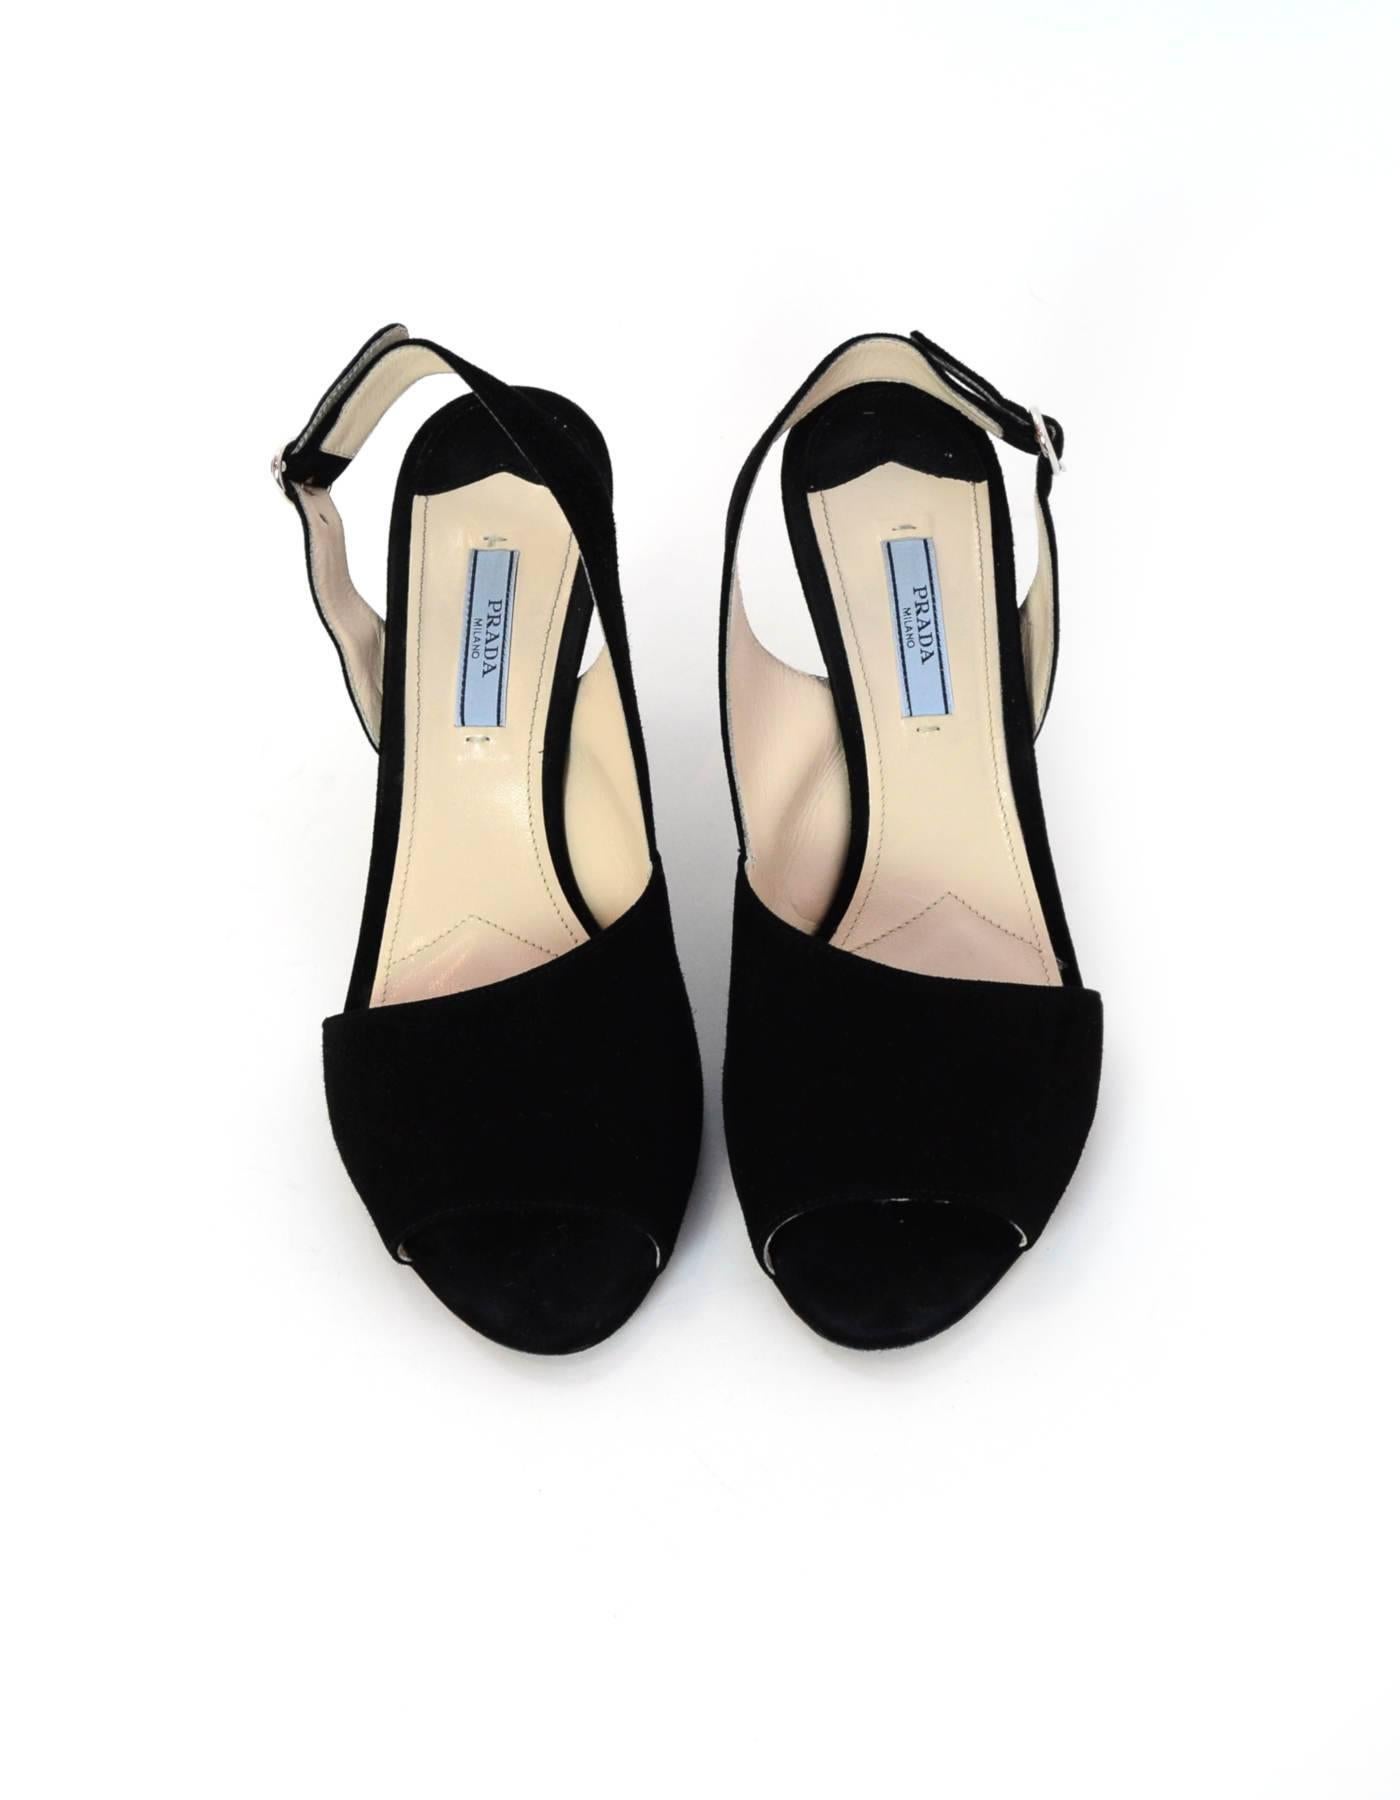 Prada Black Suede d'Orsay Open-Toe Pumps Sz 39.5 with Box, DB In Excellent Condition In New York, NY